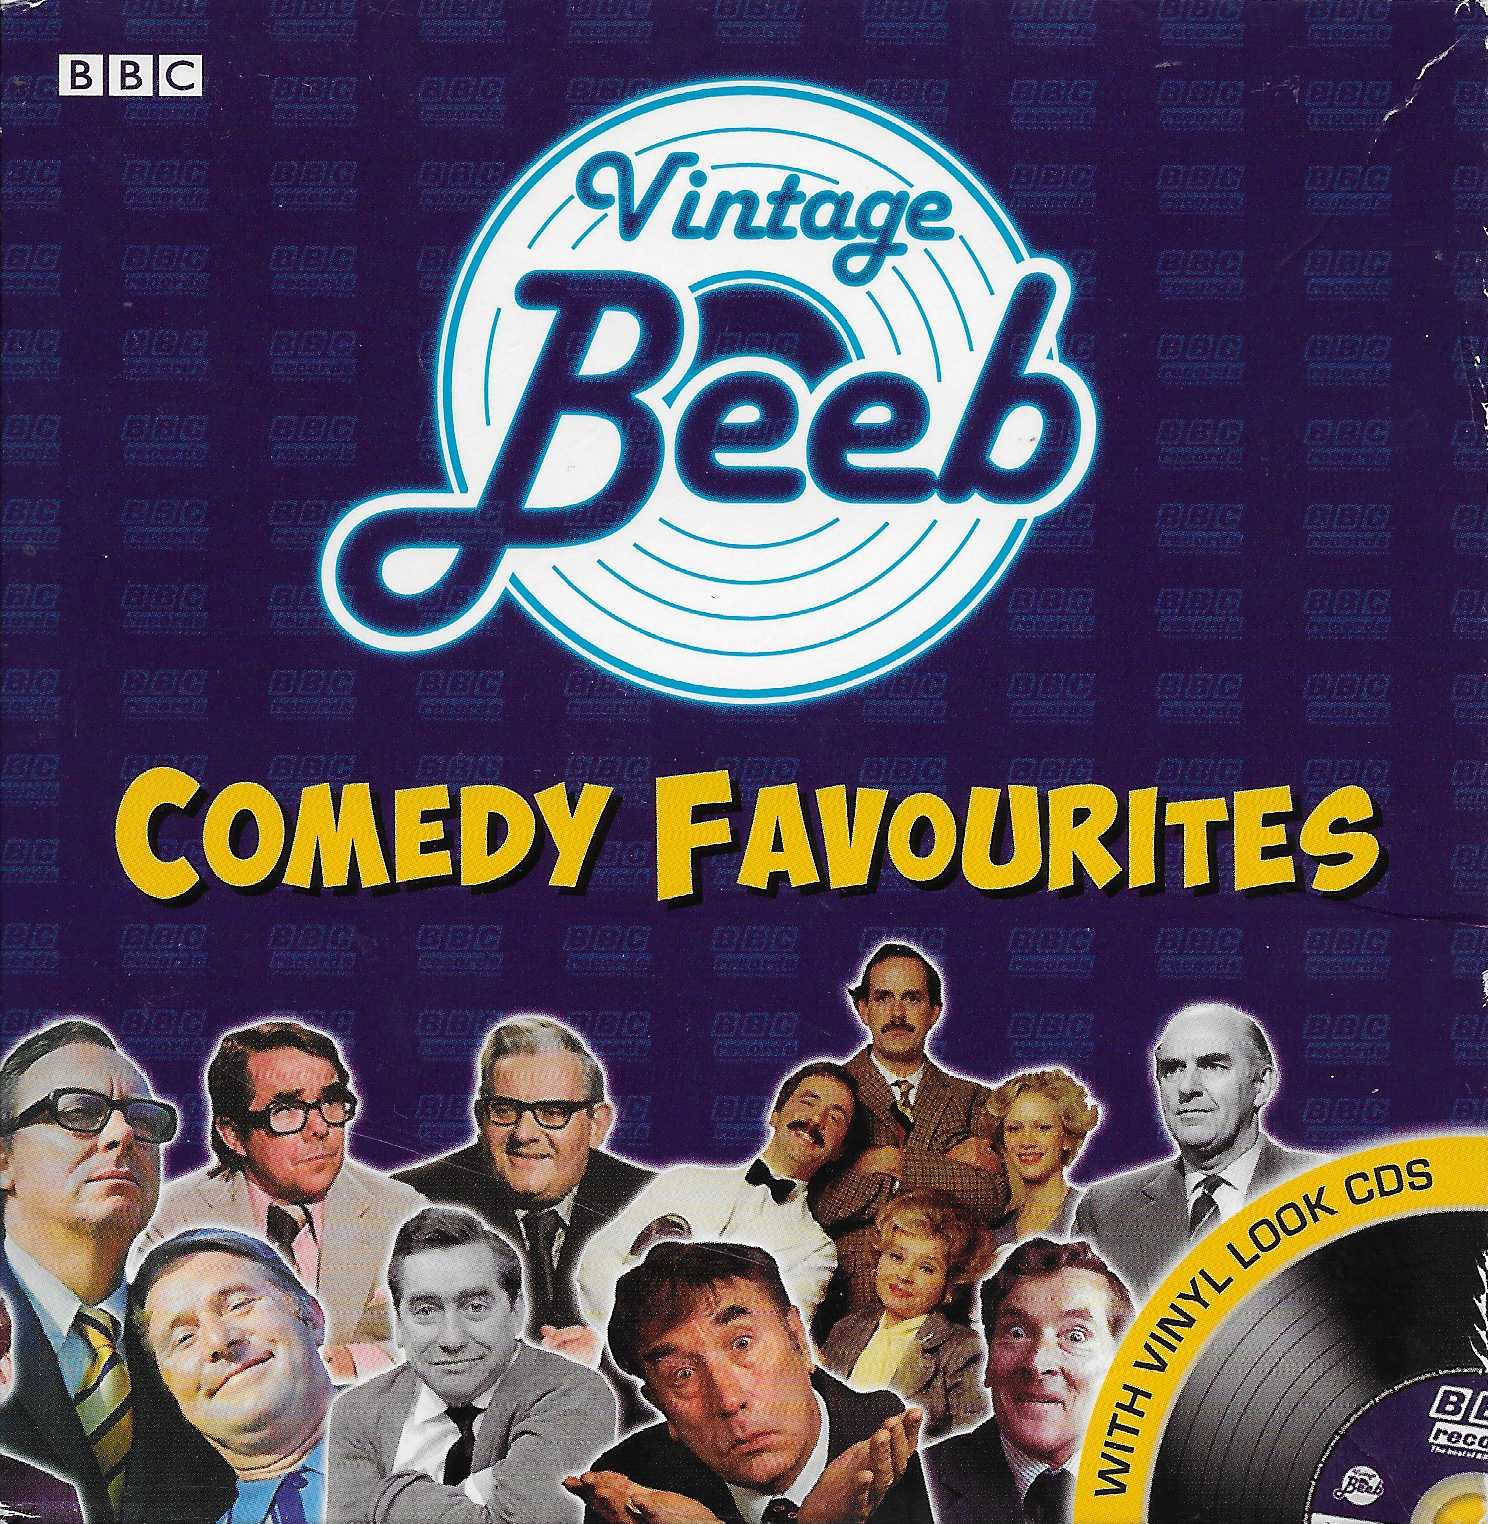 Picture of ISBN 978-1-4458-6151-7 Vintage Beeb - Comedy favourites by artist Various from the BBC cds - Records and Tapes library